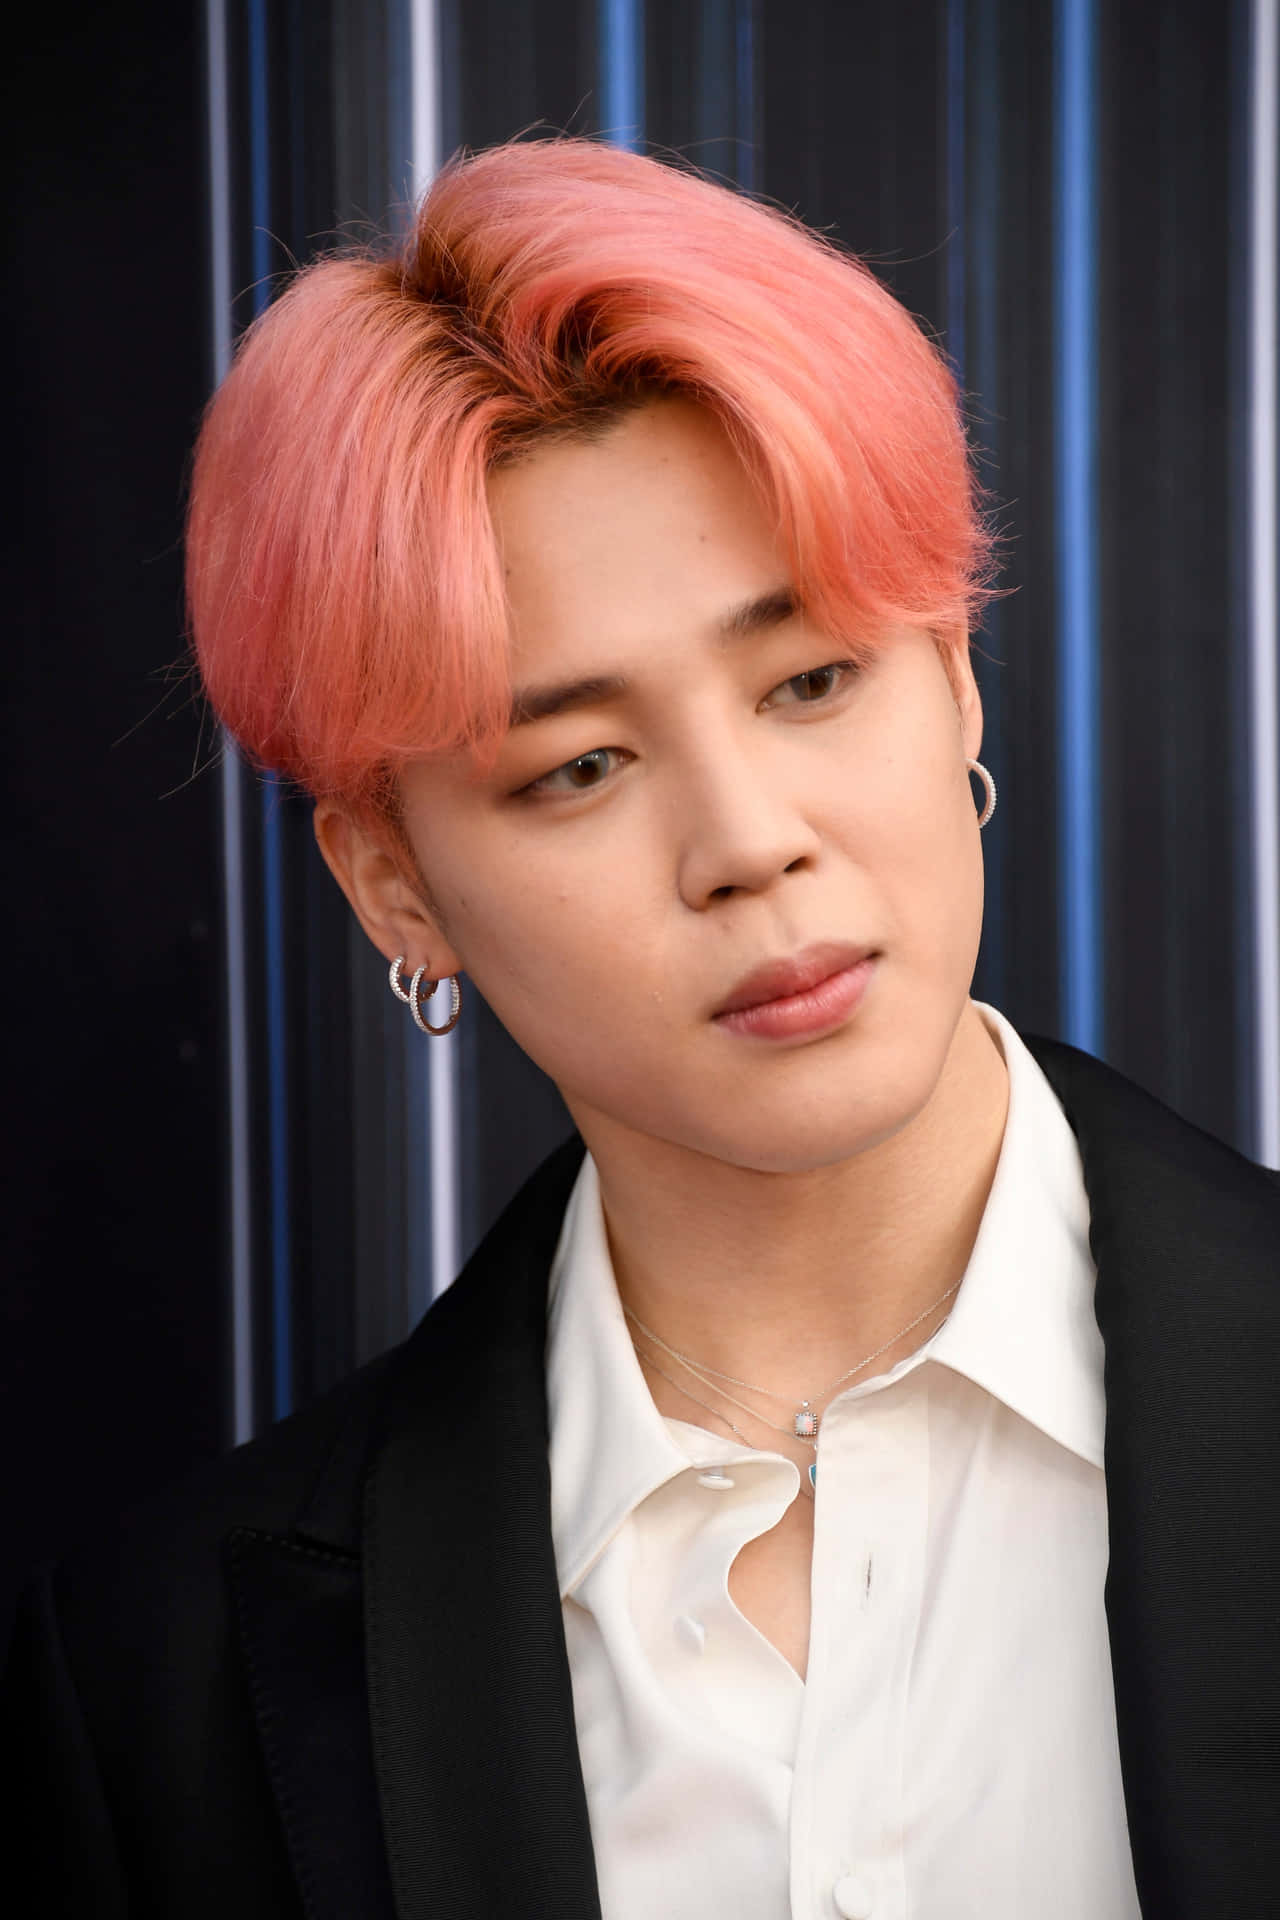 Jimin looks absolutely stunning in this red suit